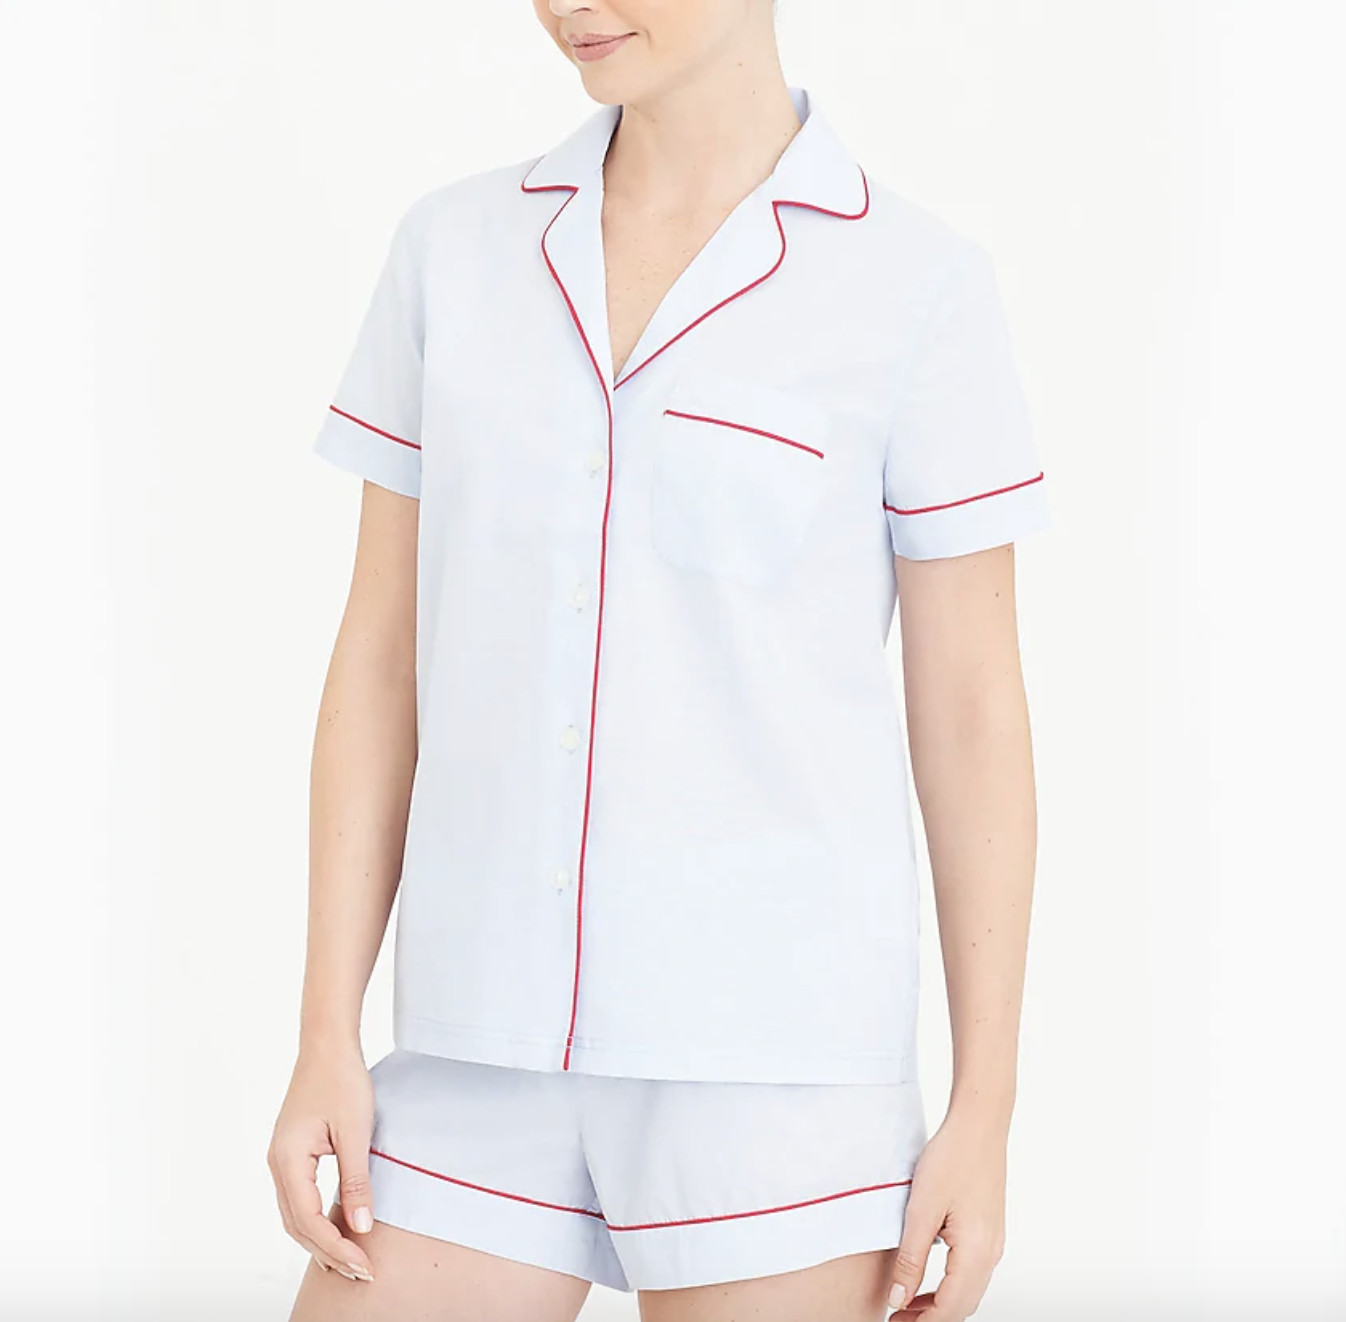 the pajama set, which consists of shorts and a short-sleeved top with fancy collar